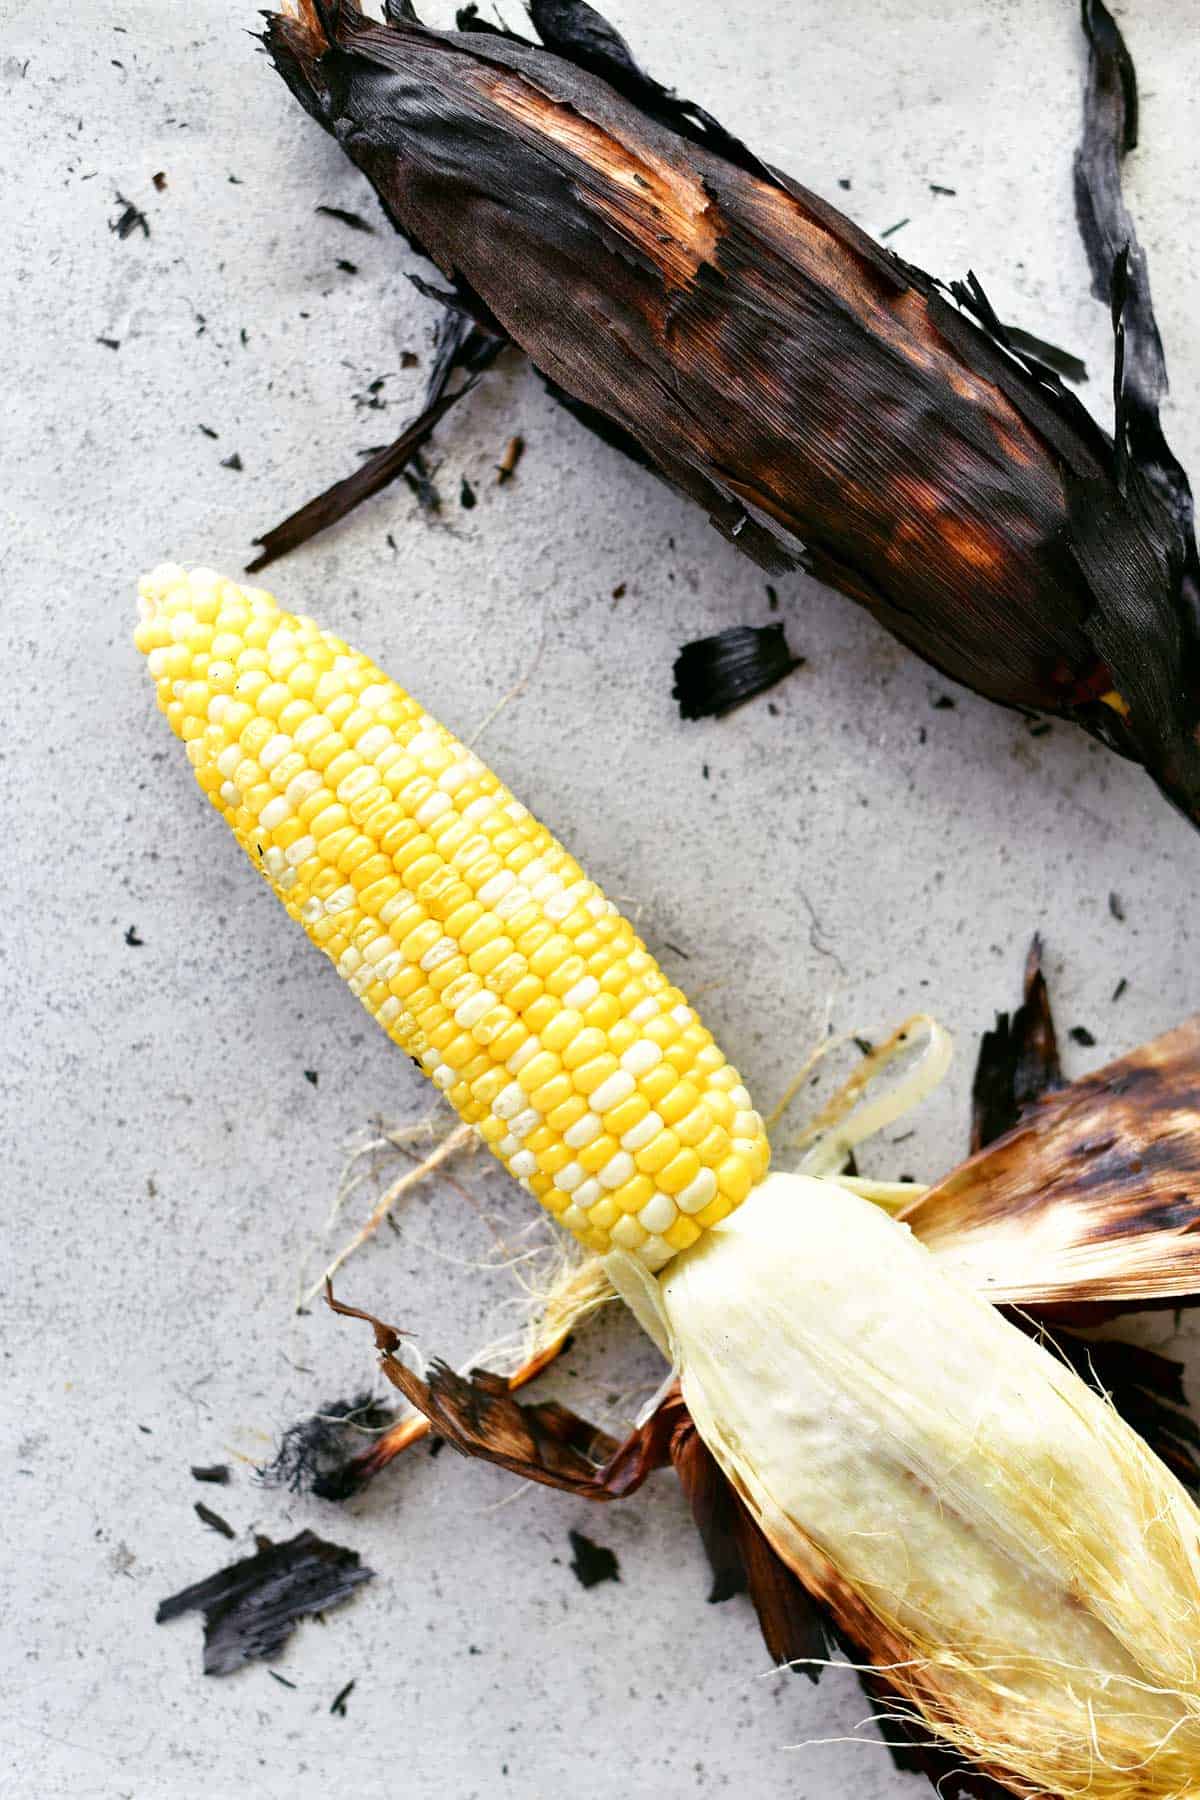 peeling grilled corn on the cob with the husks